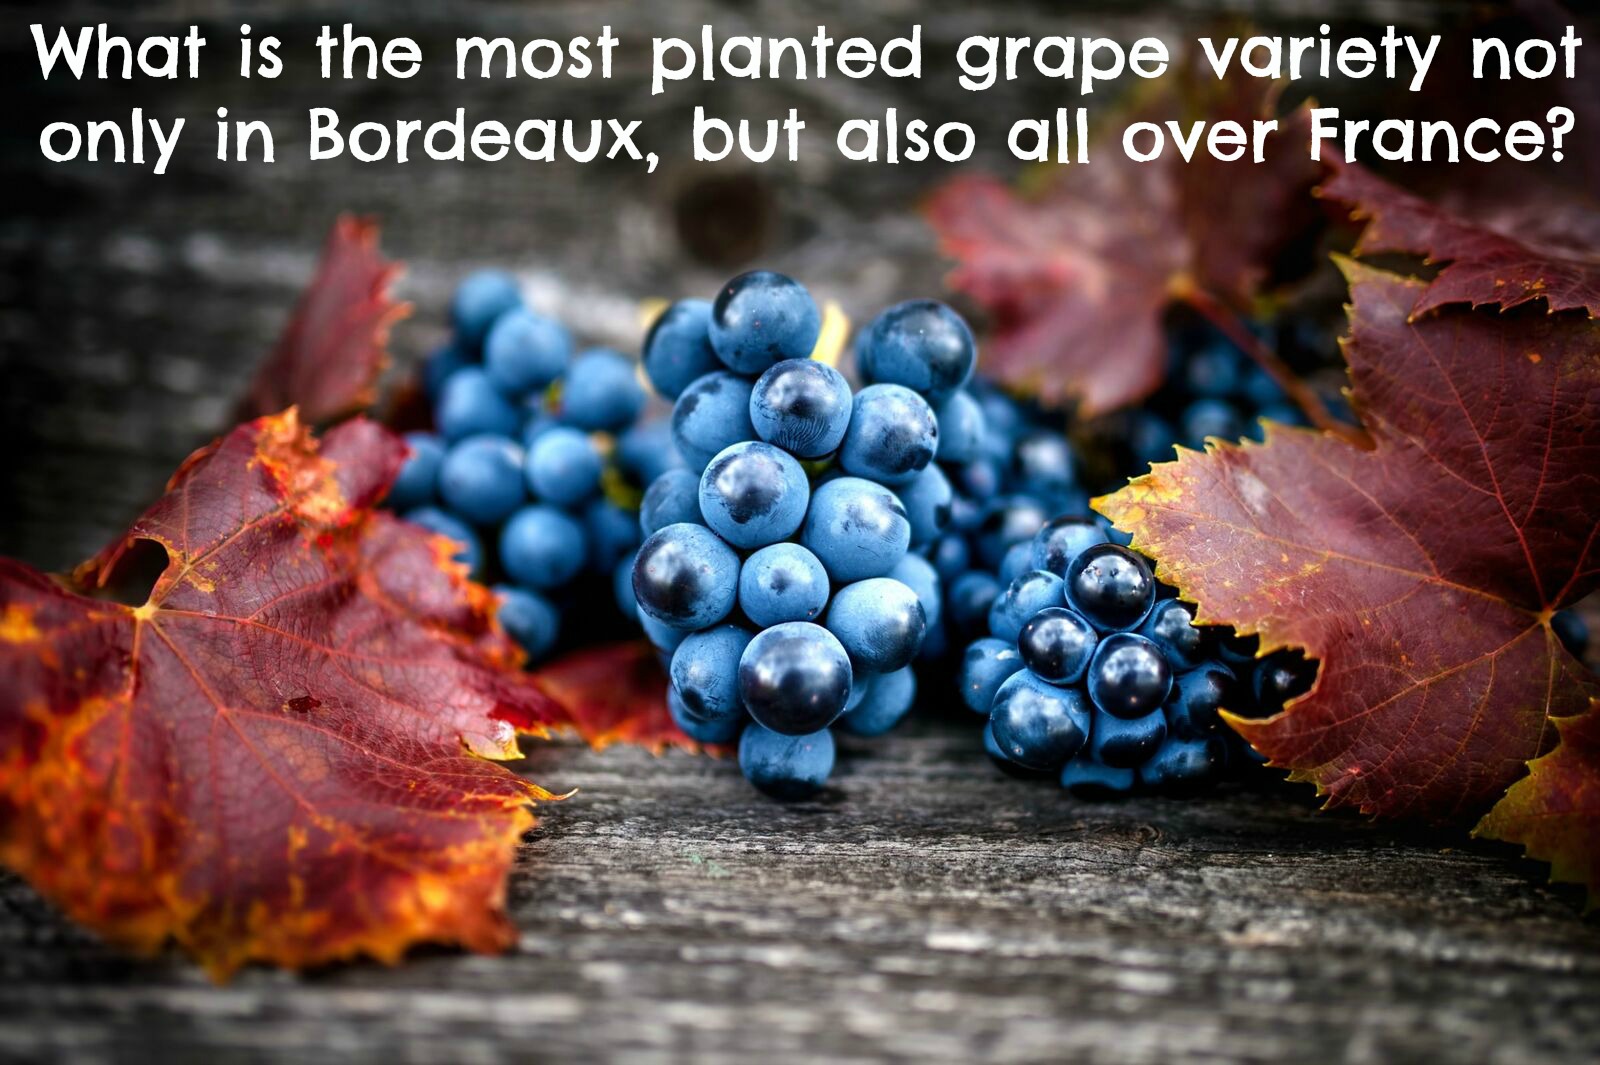 What is the most planted grape variety not only in Bordeaux, but also all over France?